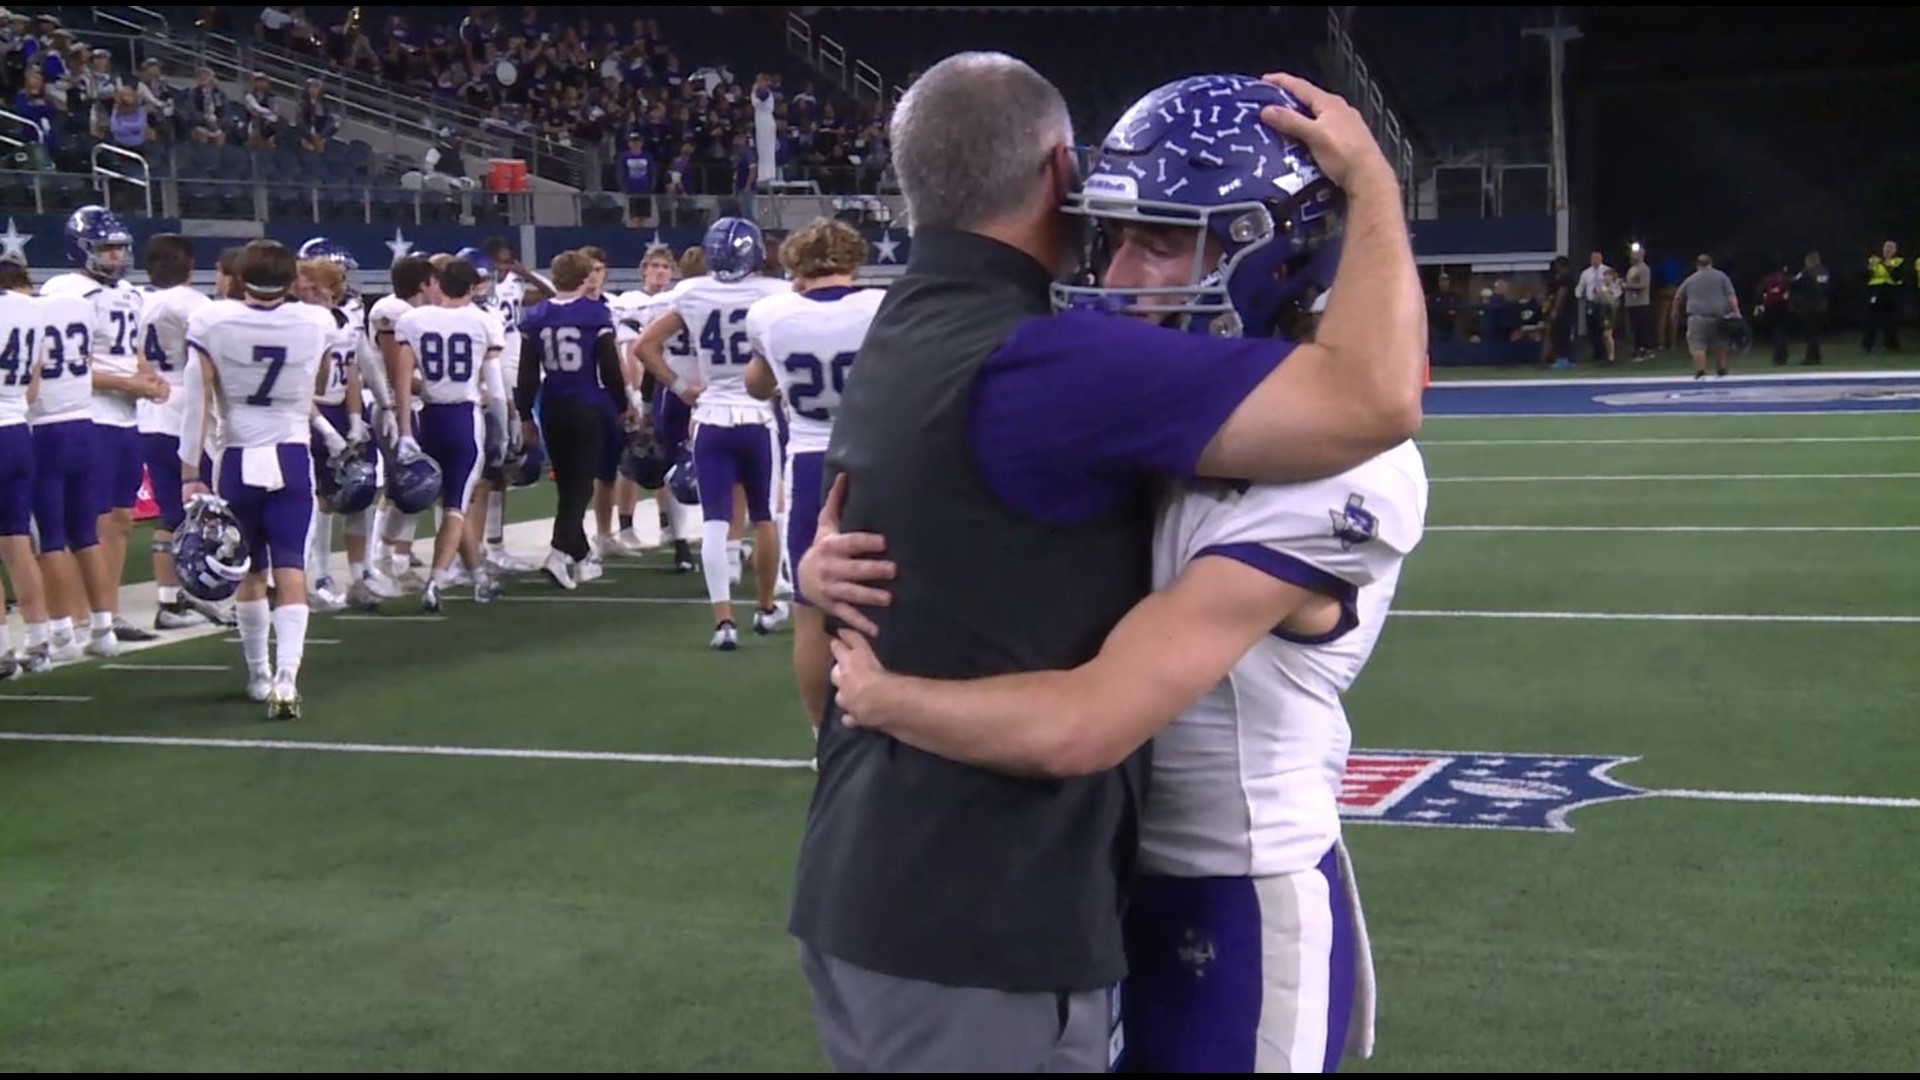 Boerne was up 21-0 on the defending champion Cougars, who would storm back to win 24-21 on a game-winning field goal.